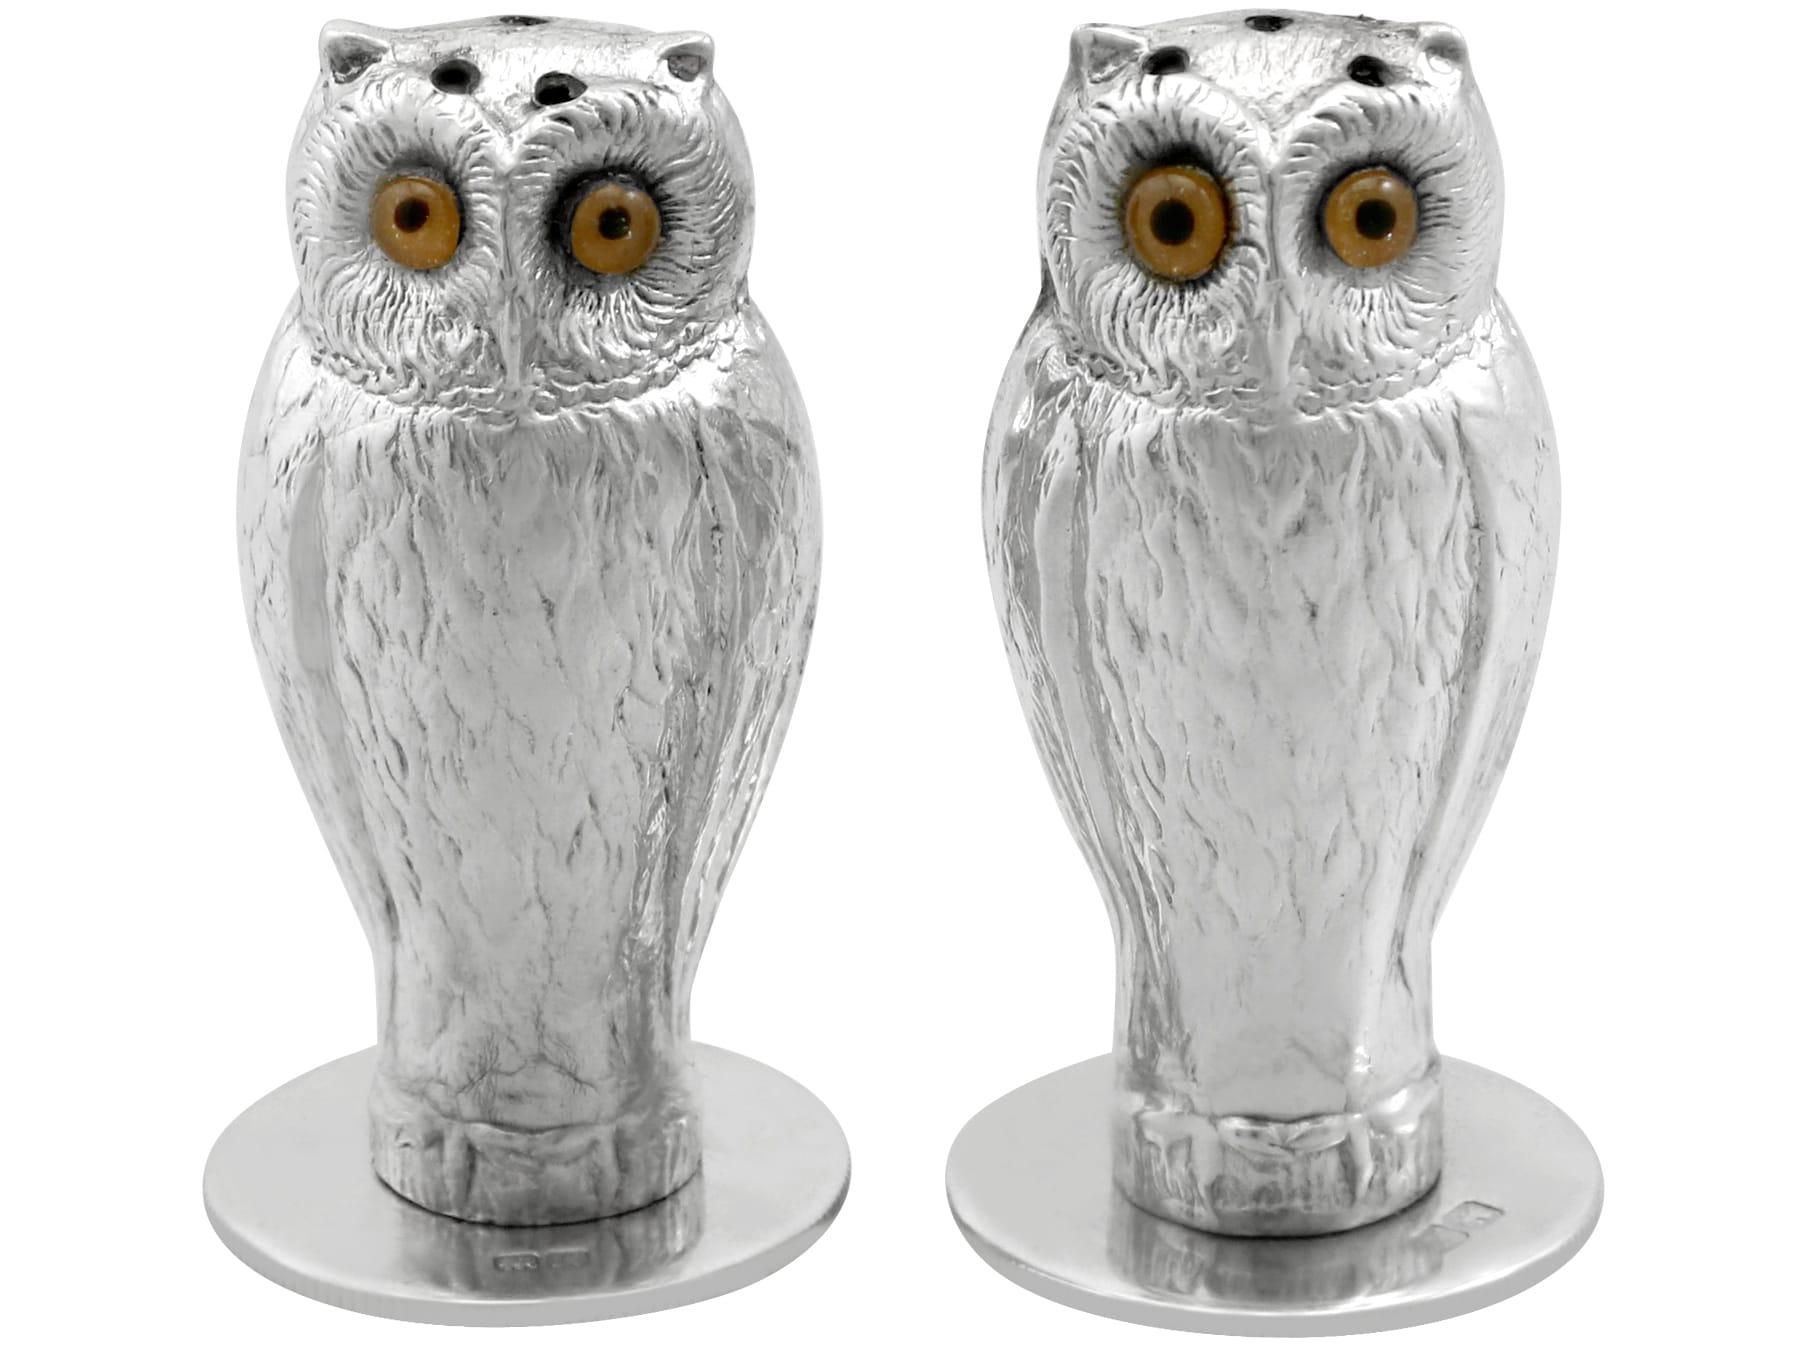 An exceptional, fine and impressive, antique George V English sterling silver pepper shakers modelled in the form of owls - boxed; an addition to our collectable silver collection

These exceptional antique George V sterling silver peppers have been